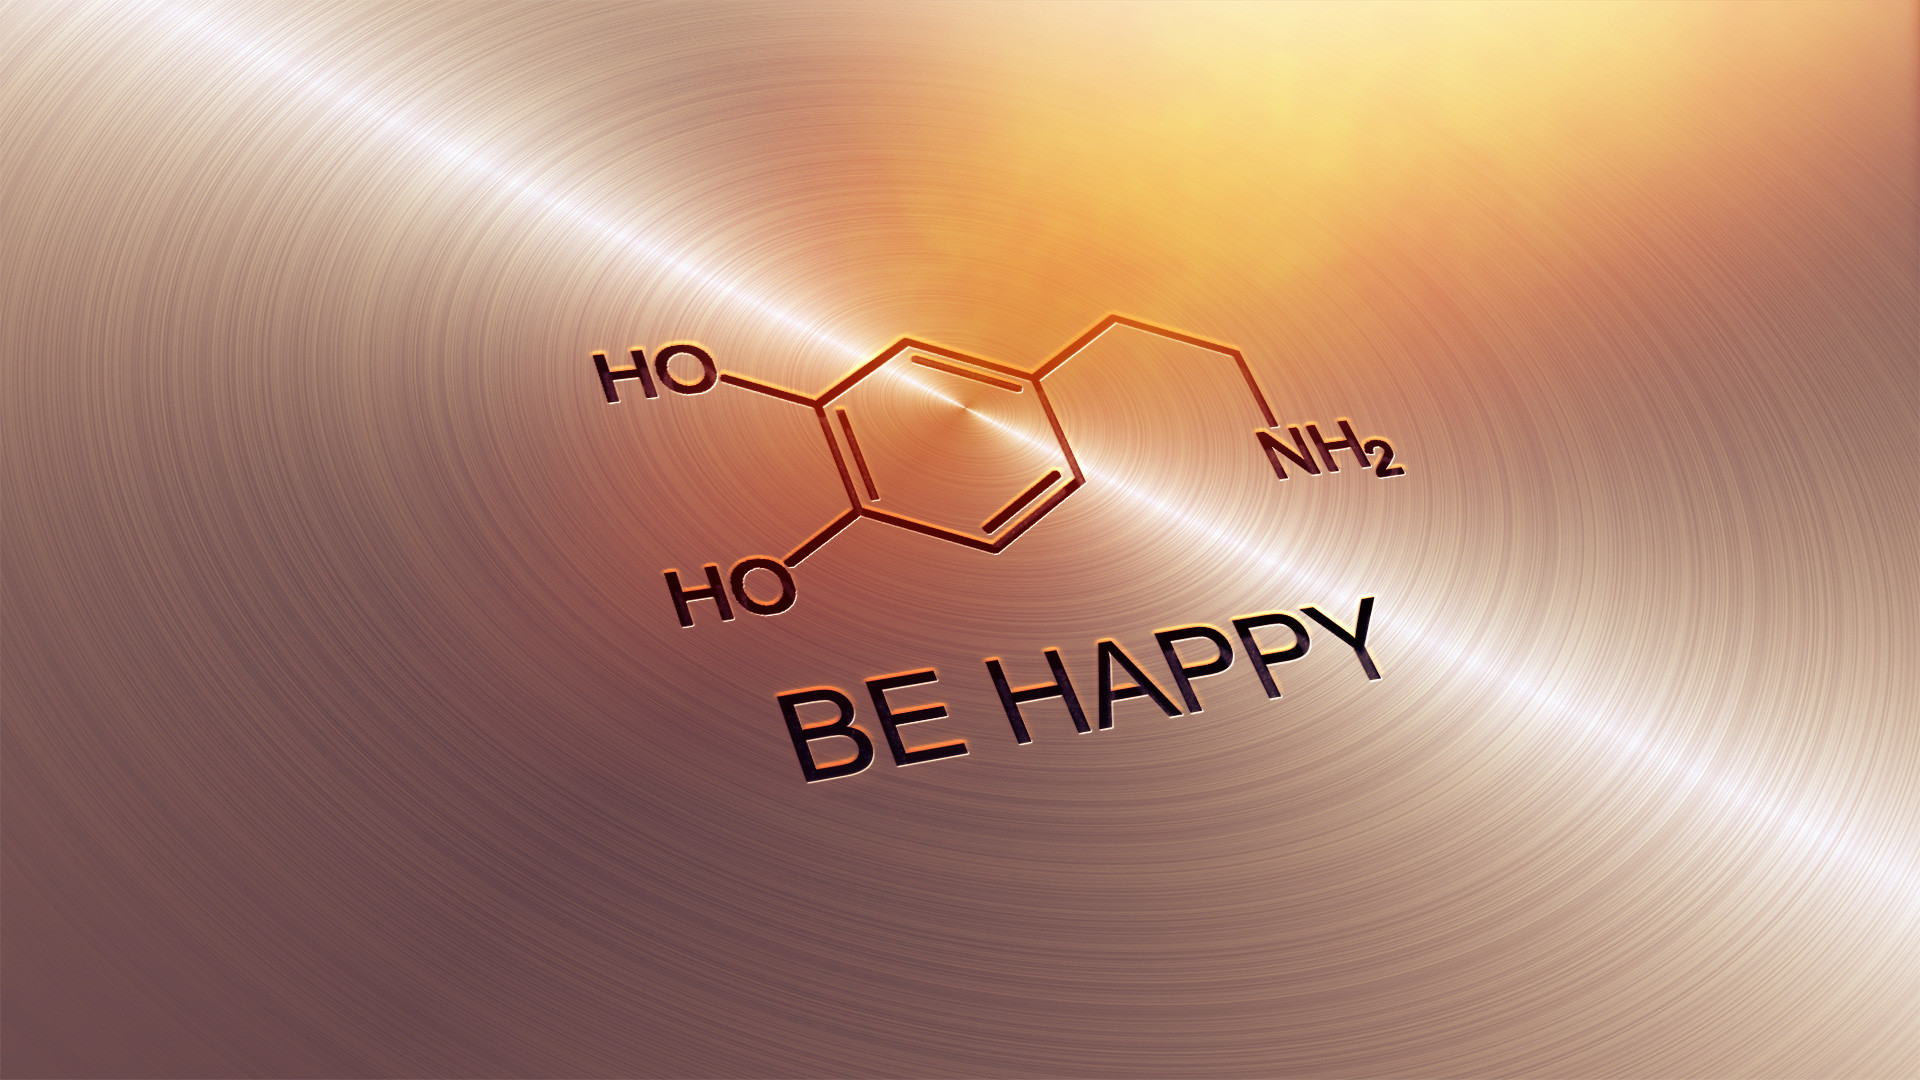 1920x1080 metal, humor, quote, mood, art,fun,dopamine, high definiton, drugs, molecule  abstract stock images, statement Wallpaper HD